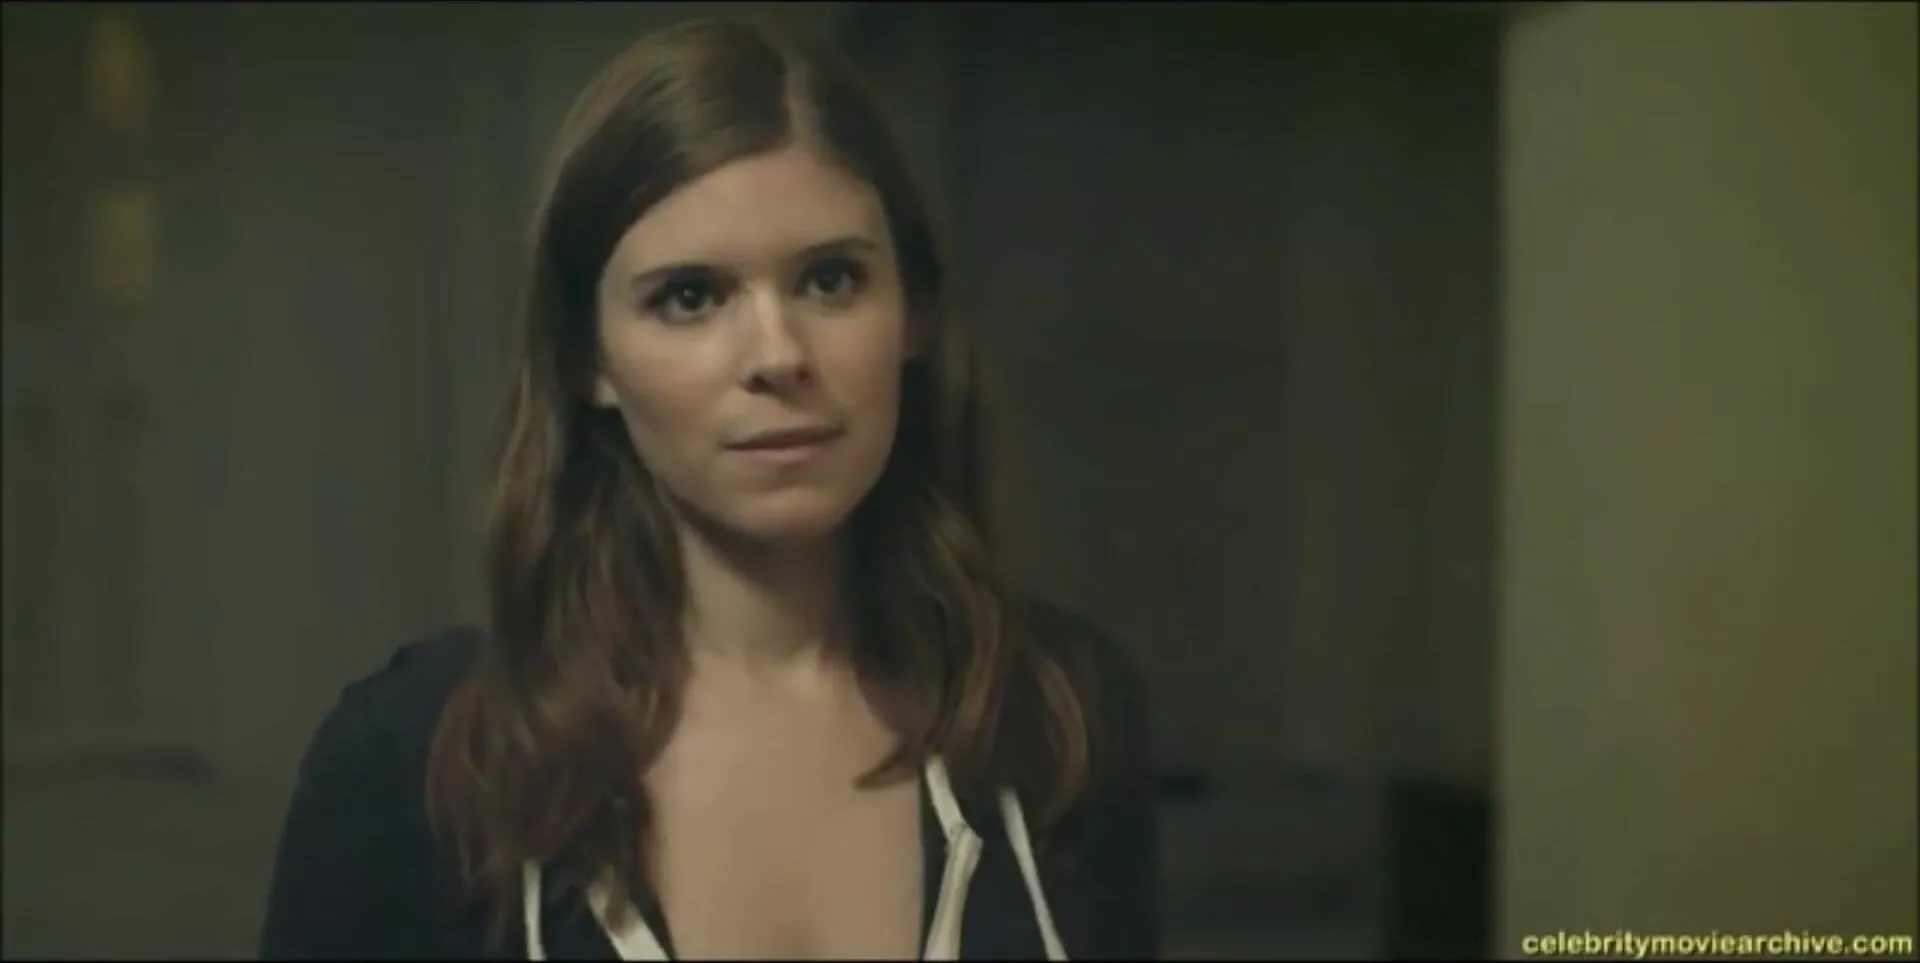 Kate Mara Look Alike Porn - Celebs: The thought of Kate Mara wearing nothing but that hoodie gets me so  hard - Porn GIF Video | nezyda.com